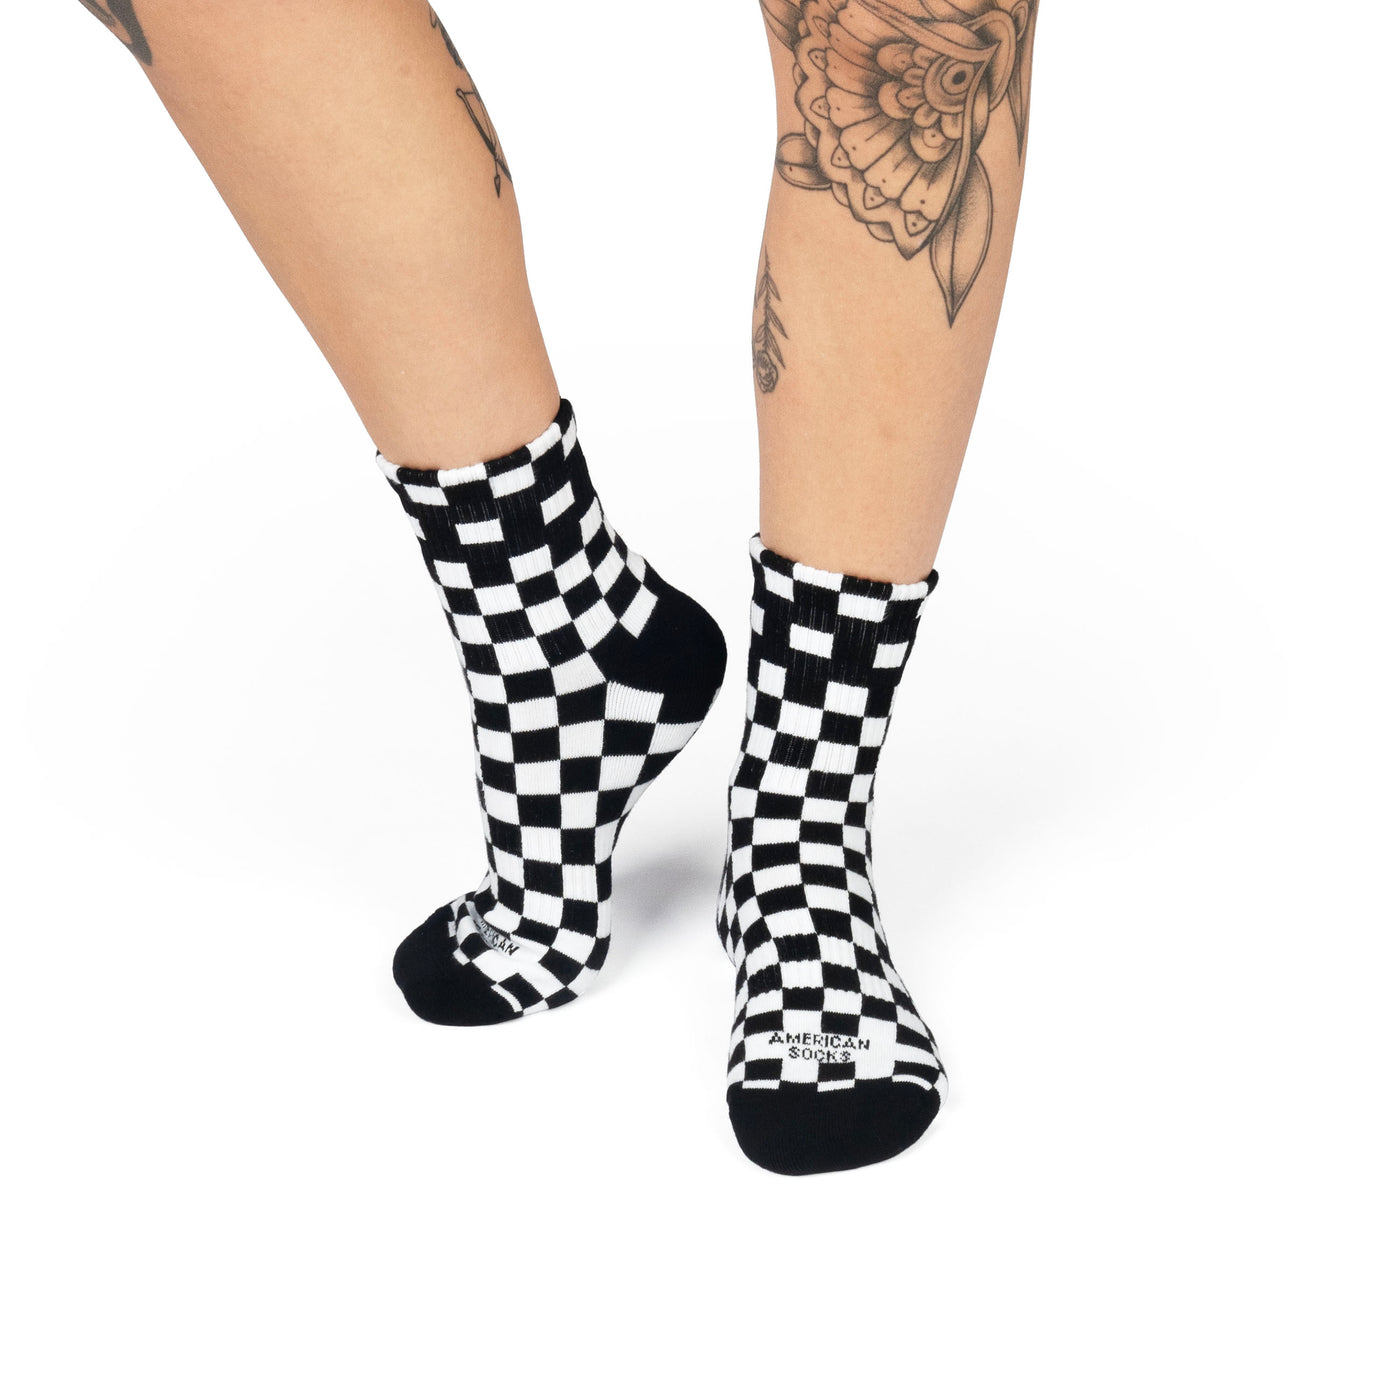 Checkerboard B/W - Ankle High